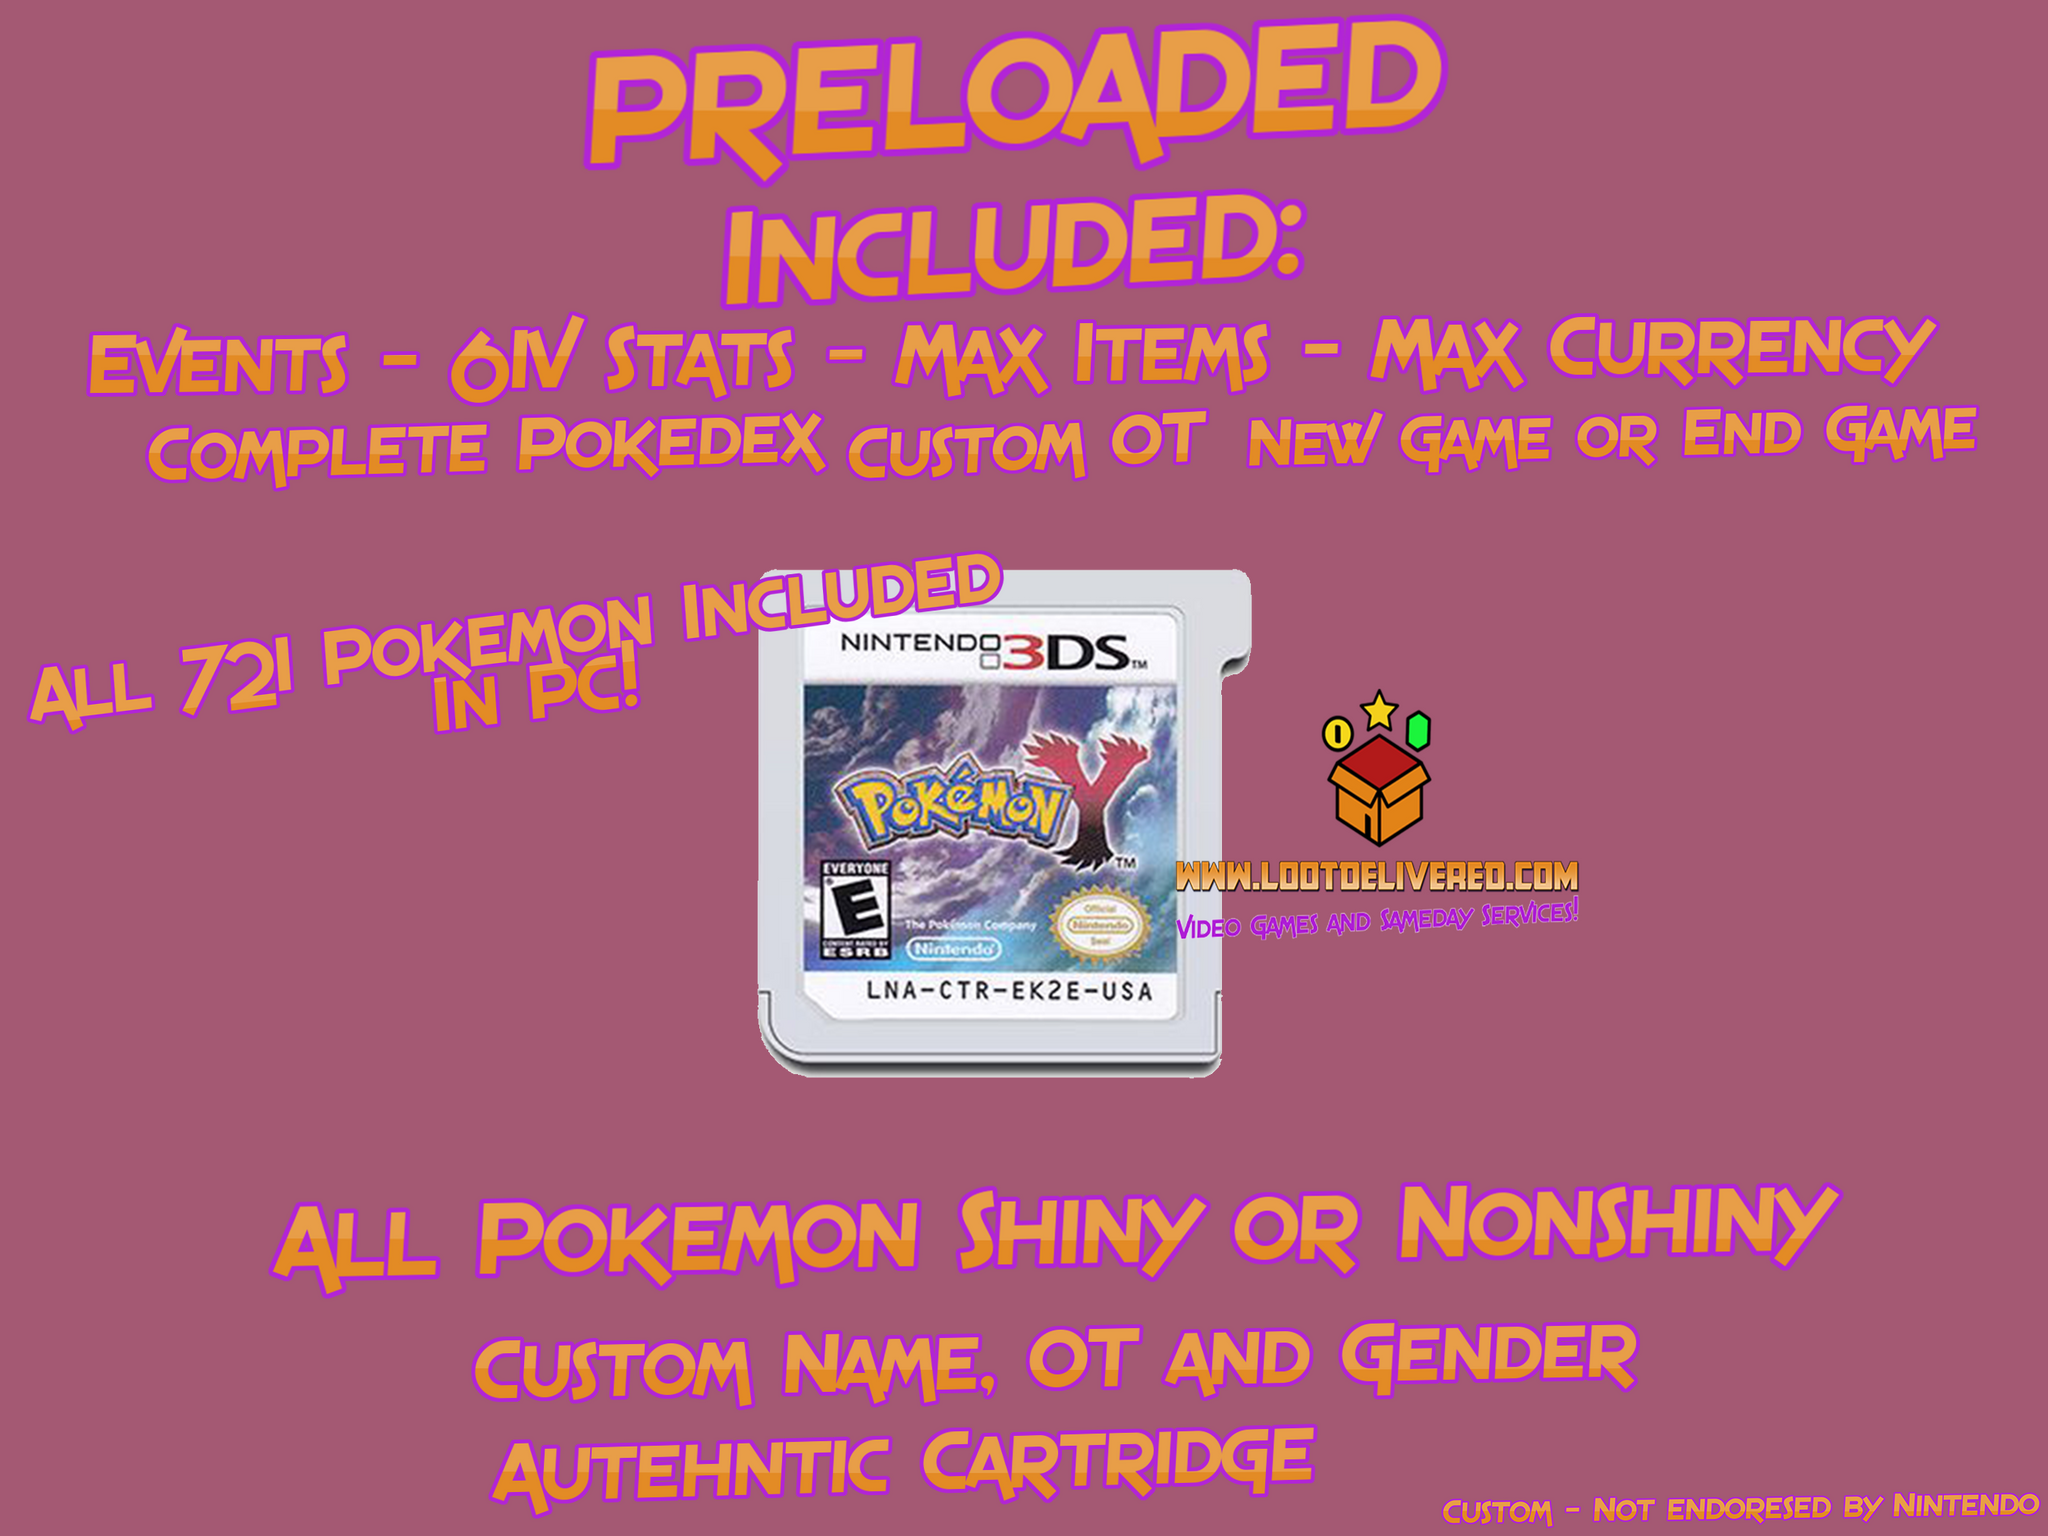 Y Legit (Physcial Loaded - 721 3DS Pokemon Enhanced Pokemon All Event With Game) Enhanced! +